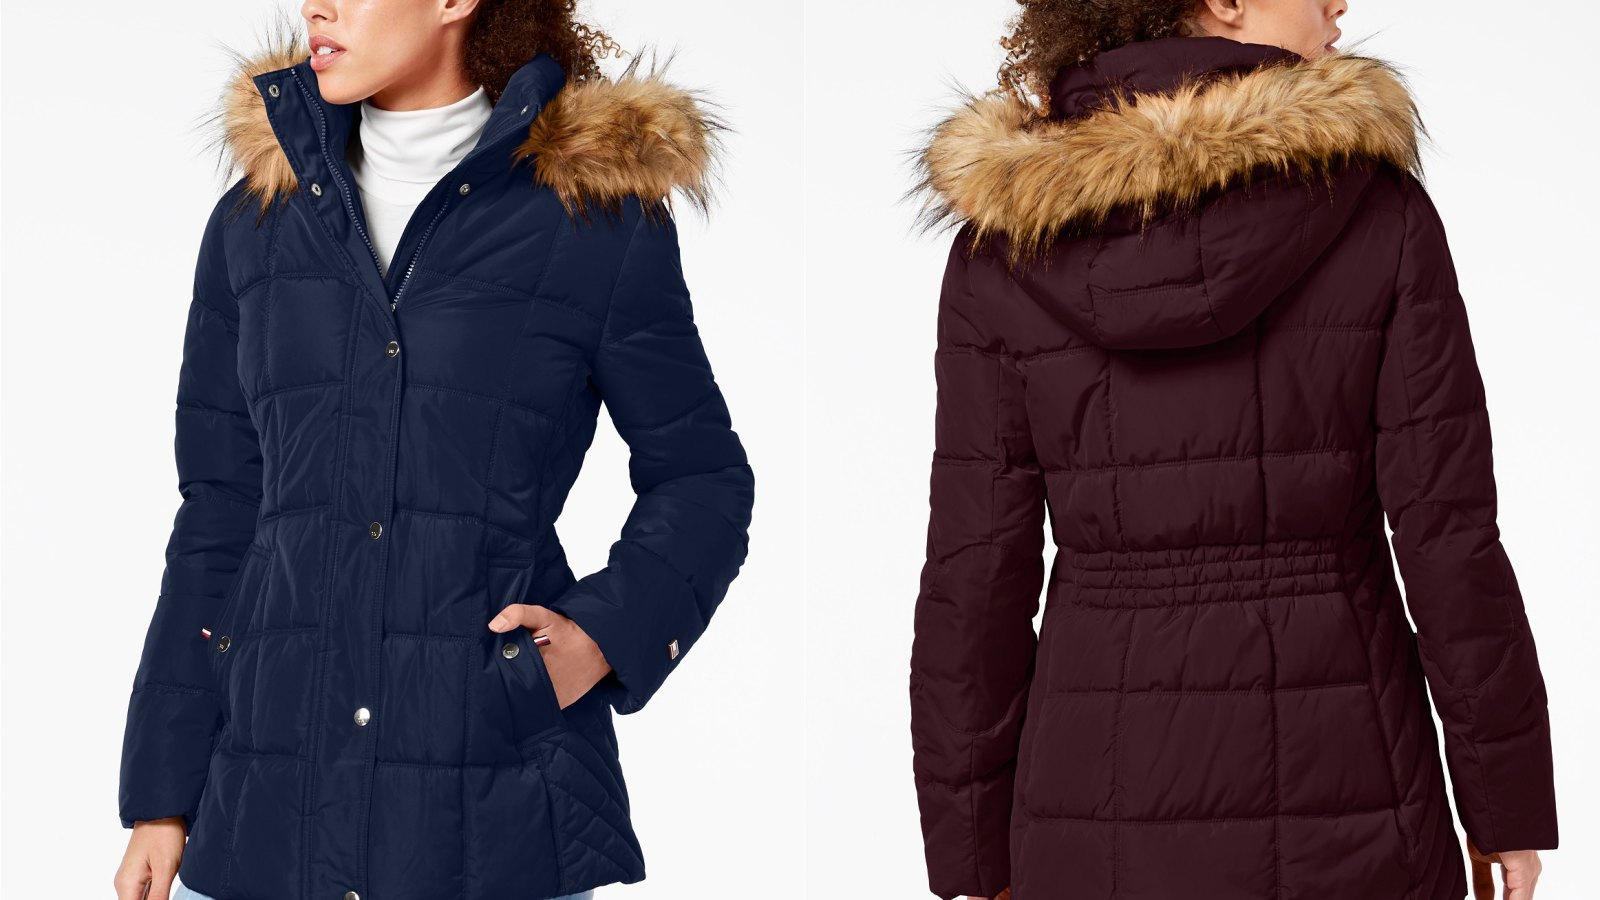 Tommy Hilfiger Hooded Faux-Fur-Trim Puffer Coat, Created For Macy's (Navy/Aubergine)